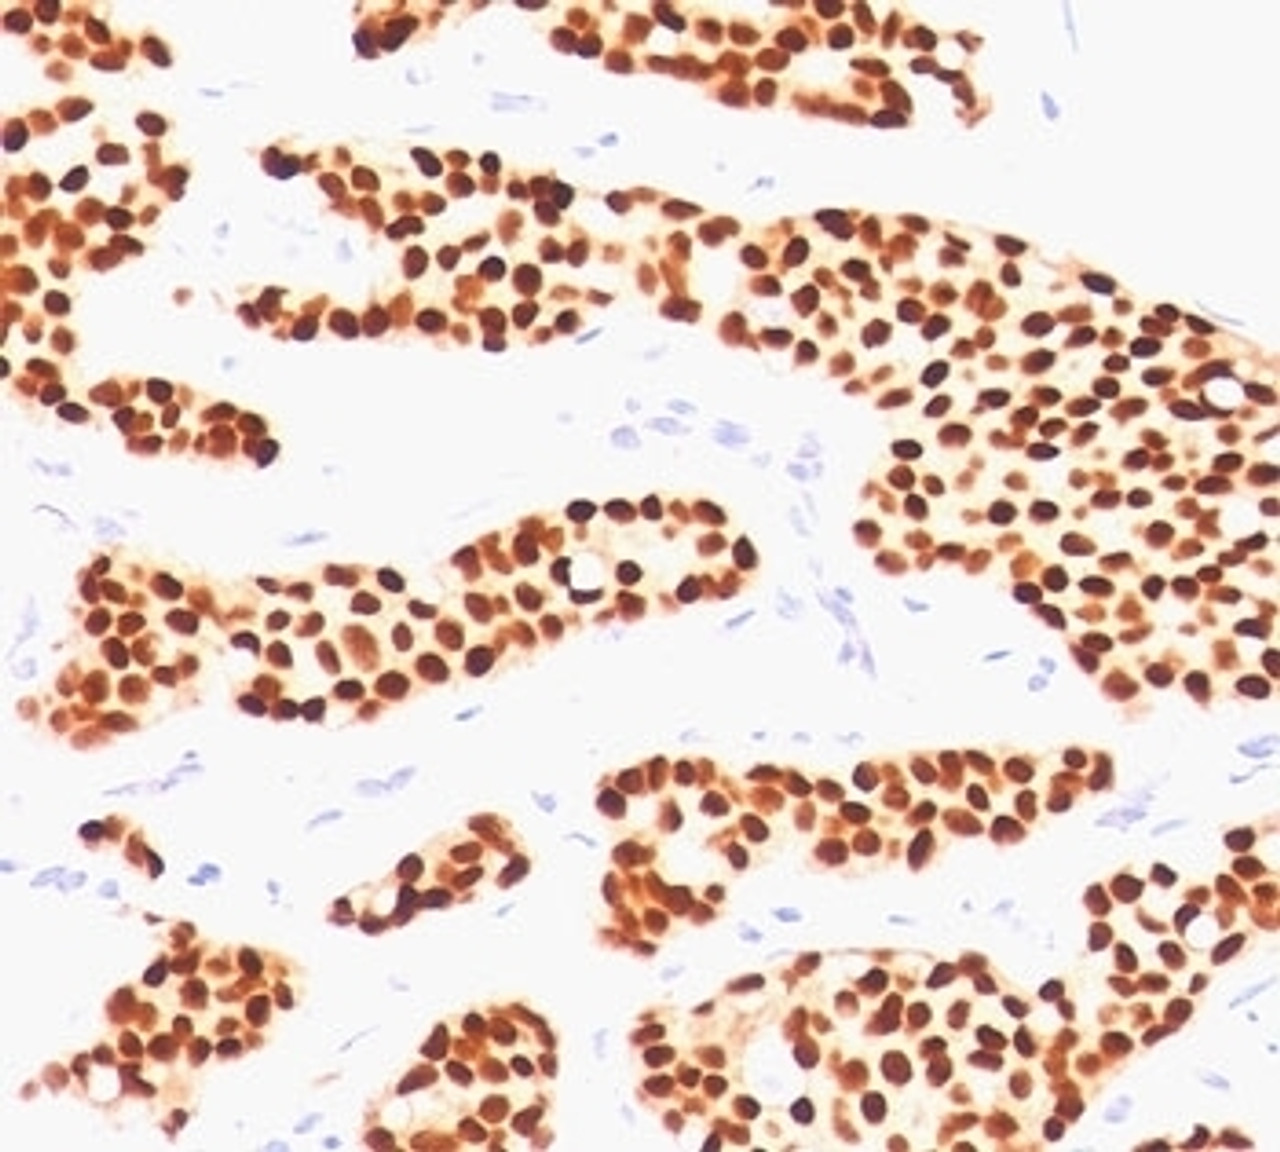 IHC testing of human breast invasive carcinoma stained with Estrogen receptor antibody (ER505) .